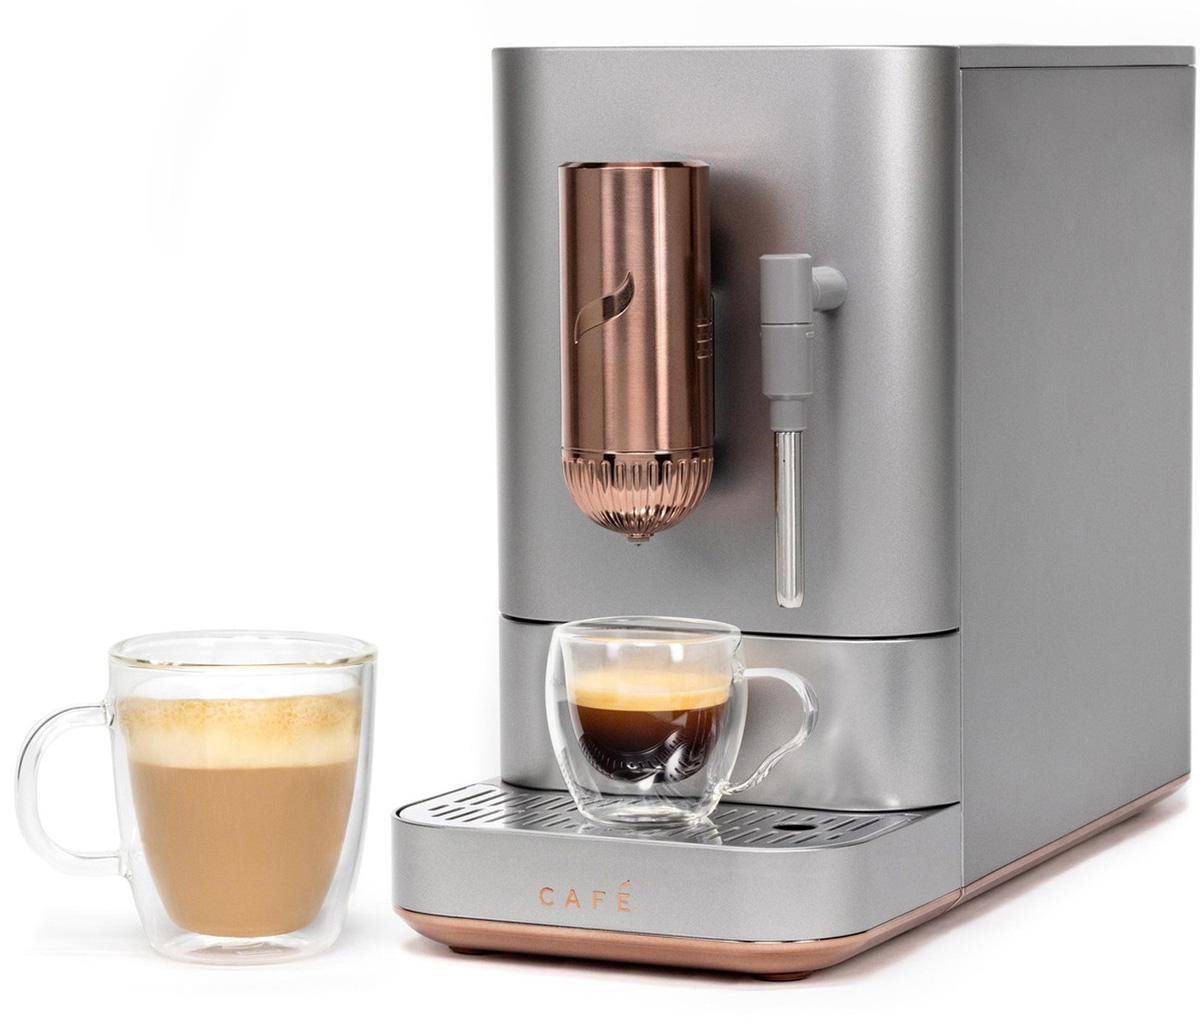 Cafe Affetto Automatic Espresso Machine with Milk Frother for $229 Shipped